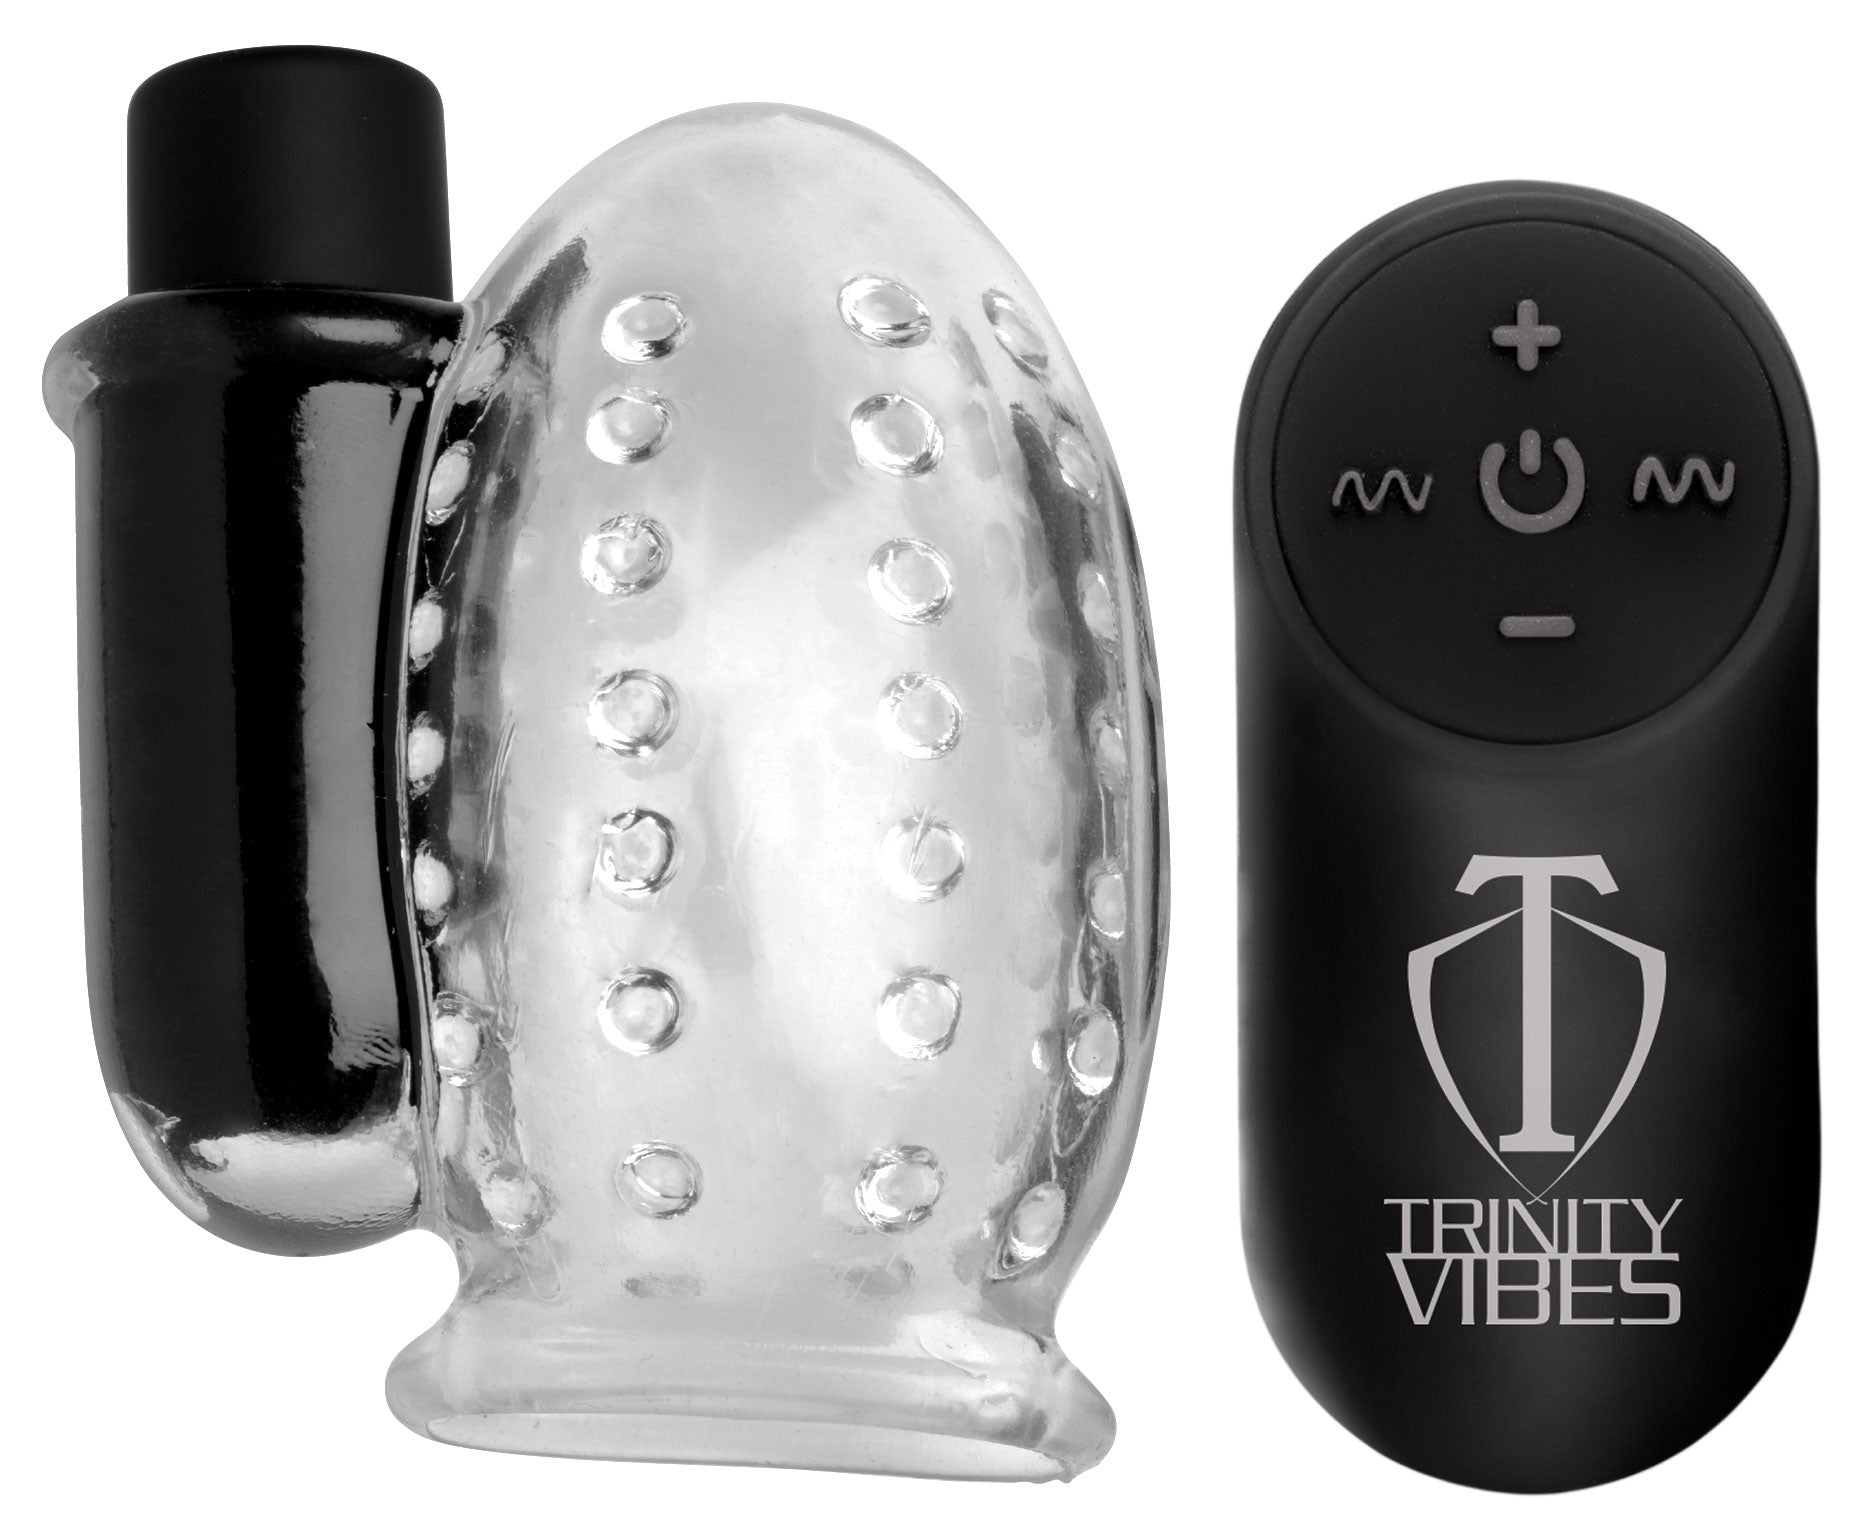 28X Rechargeable Penis Head Teaser with Remote Control